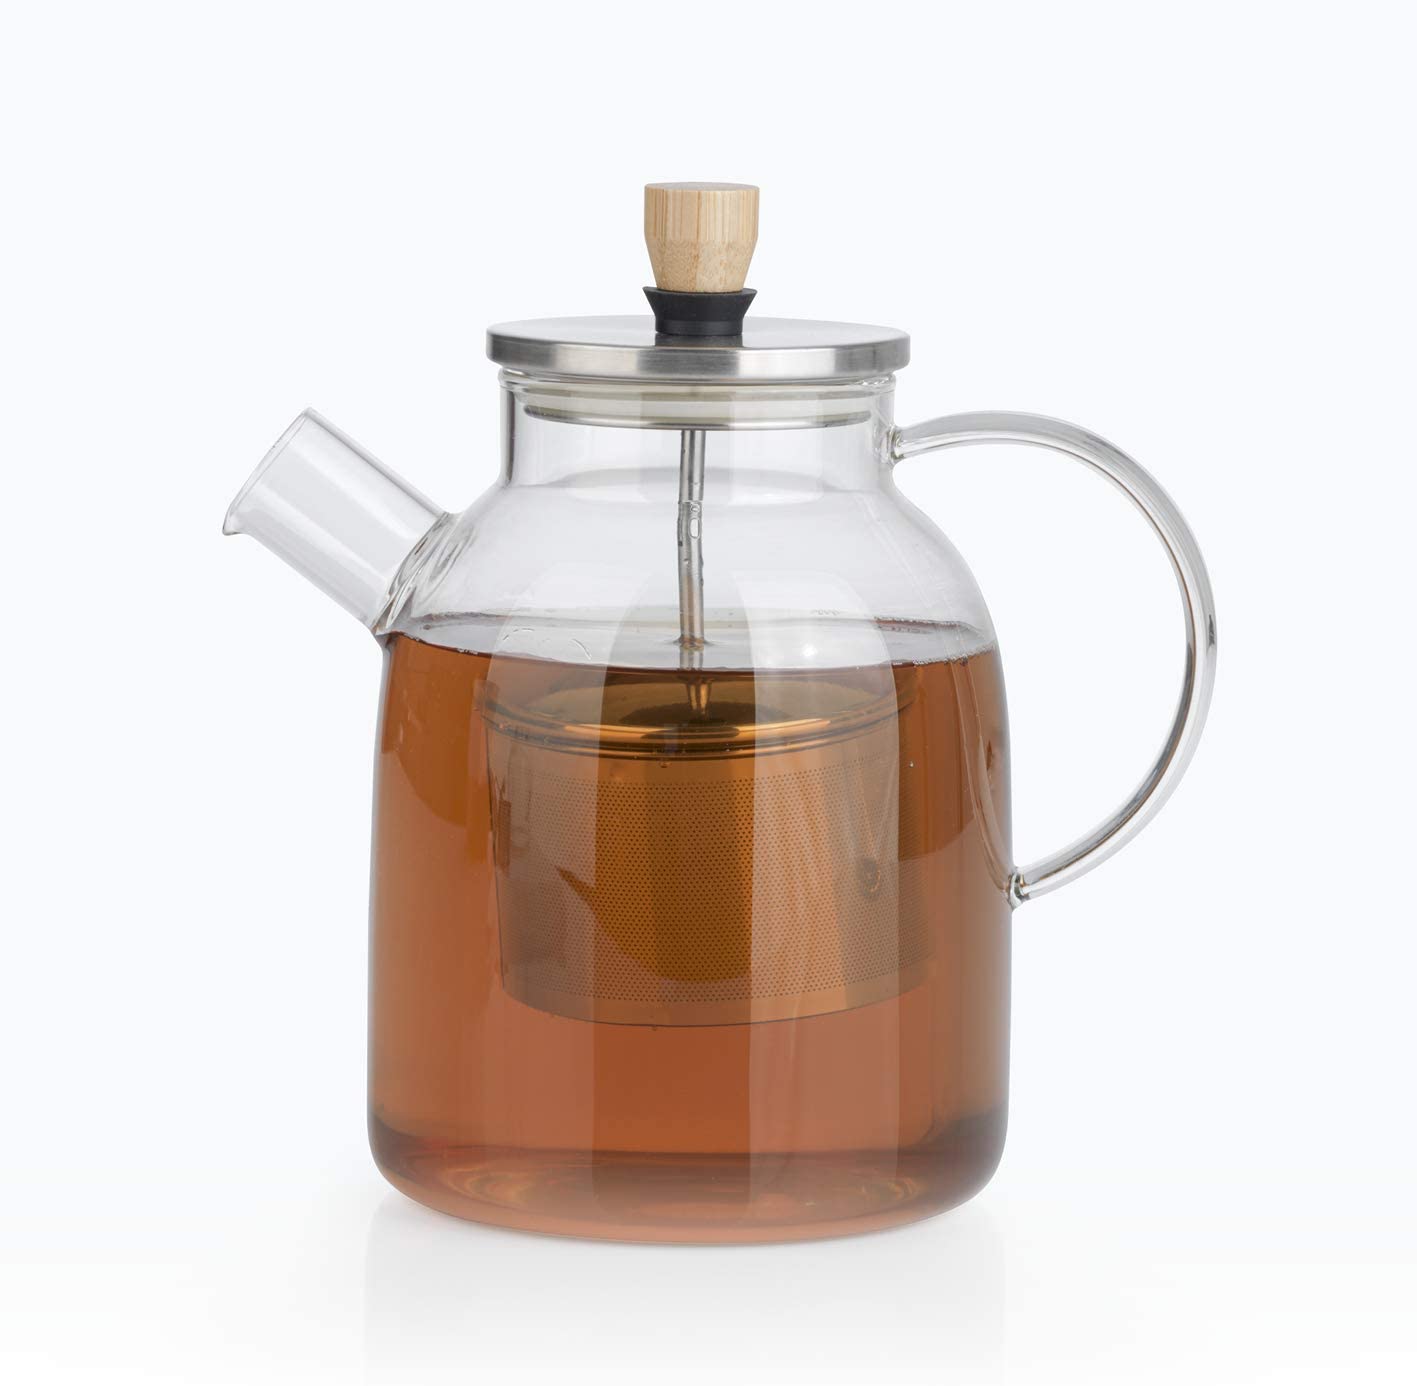 BEEM Teekanne Glass Jug with Strainer Insert - 1.5 Litres | Teapot Glass | Strainer Stainless Steel with Lifting Function | Heat-Resistant Glass | For Hot Tea or Iced Tea